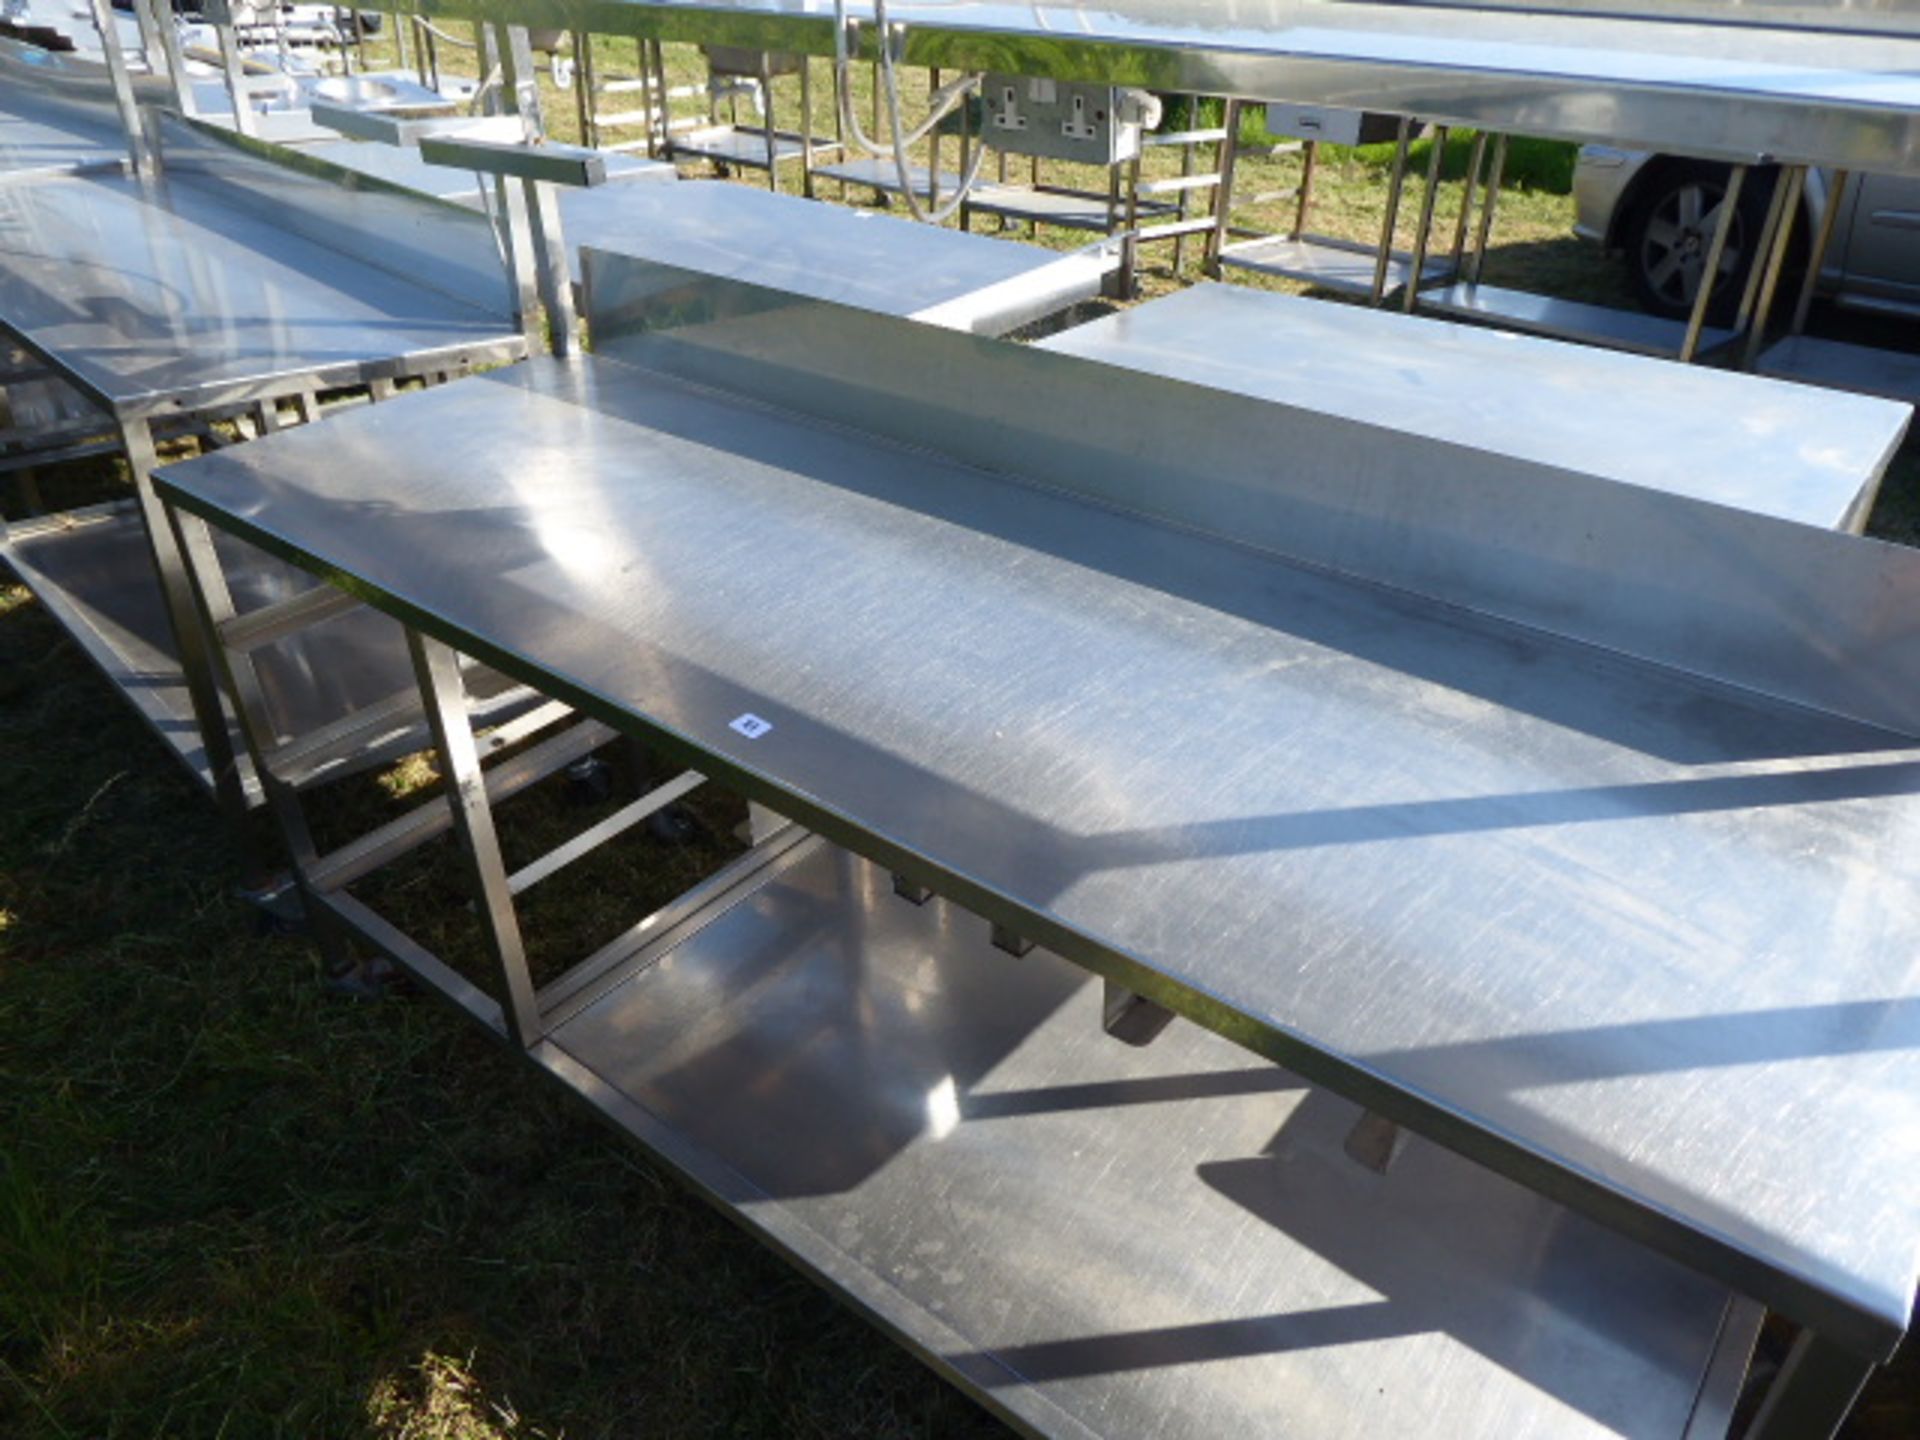 Stainless steel mobile food preparation station with 2 shelves over, shelf under space for trays, - Image 2 of 3